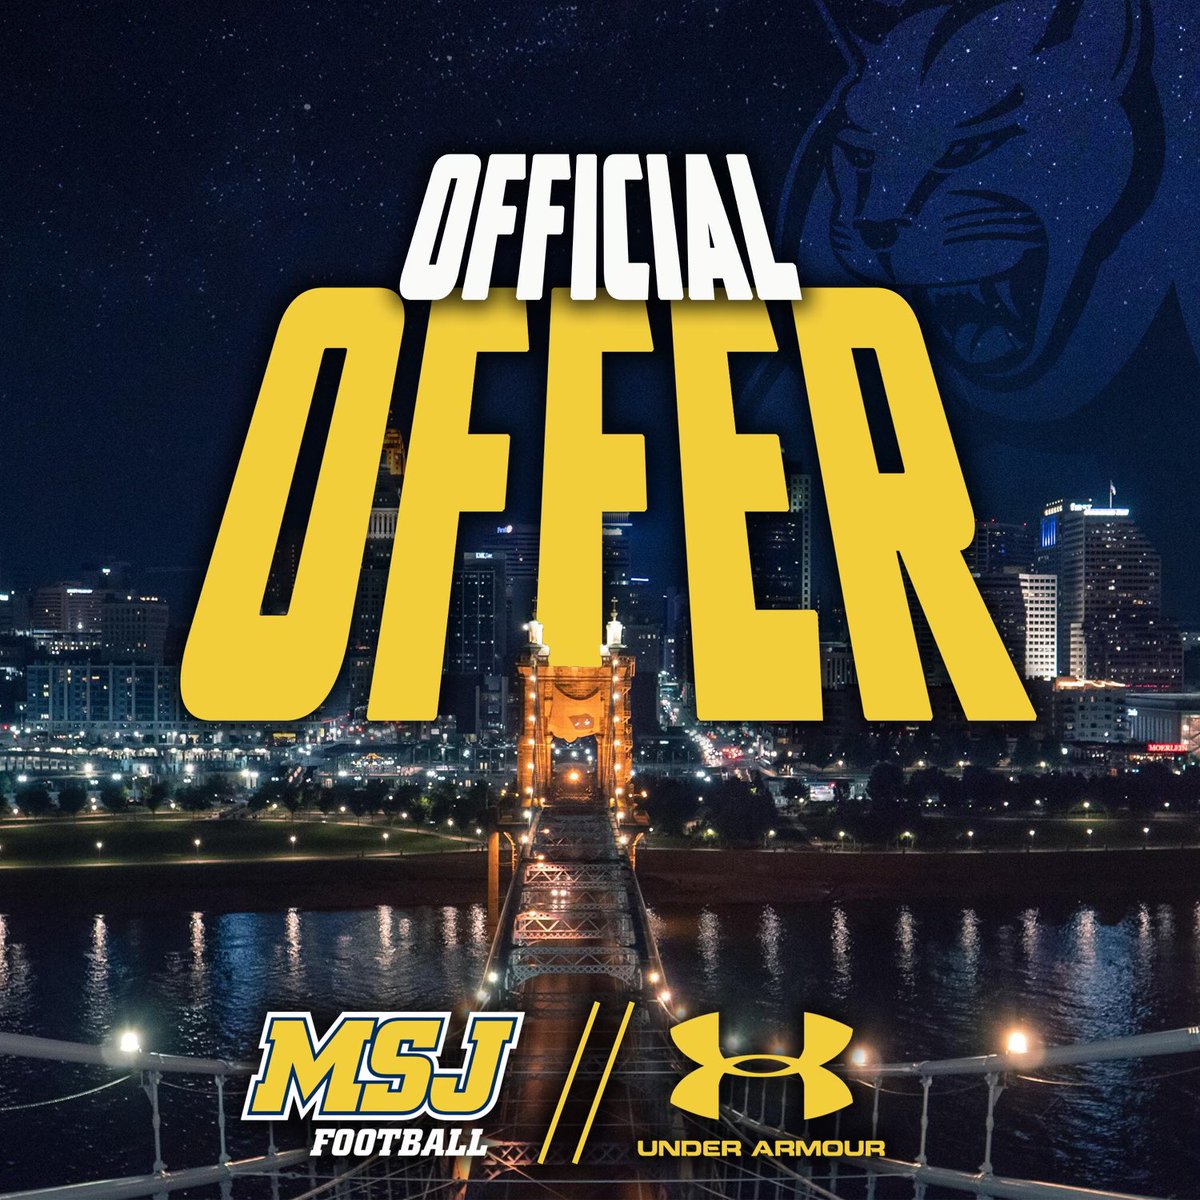 After a great conversation with @Coach_DHughes I’m extremely grateful for the offer. I truly appreciate it. @dhan561 @donferraro317 @APirch @Jeffhansel17 @Coachdiesel41 @LBrannon53 @wolf1103 @larryblustein @ODFBall @PP_All_American @PrepRedzoneFL @PrepRedzoneOH @TonyMit47723710